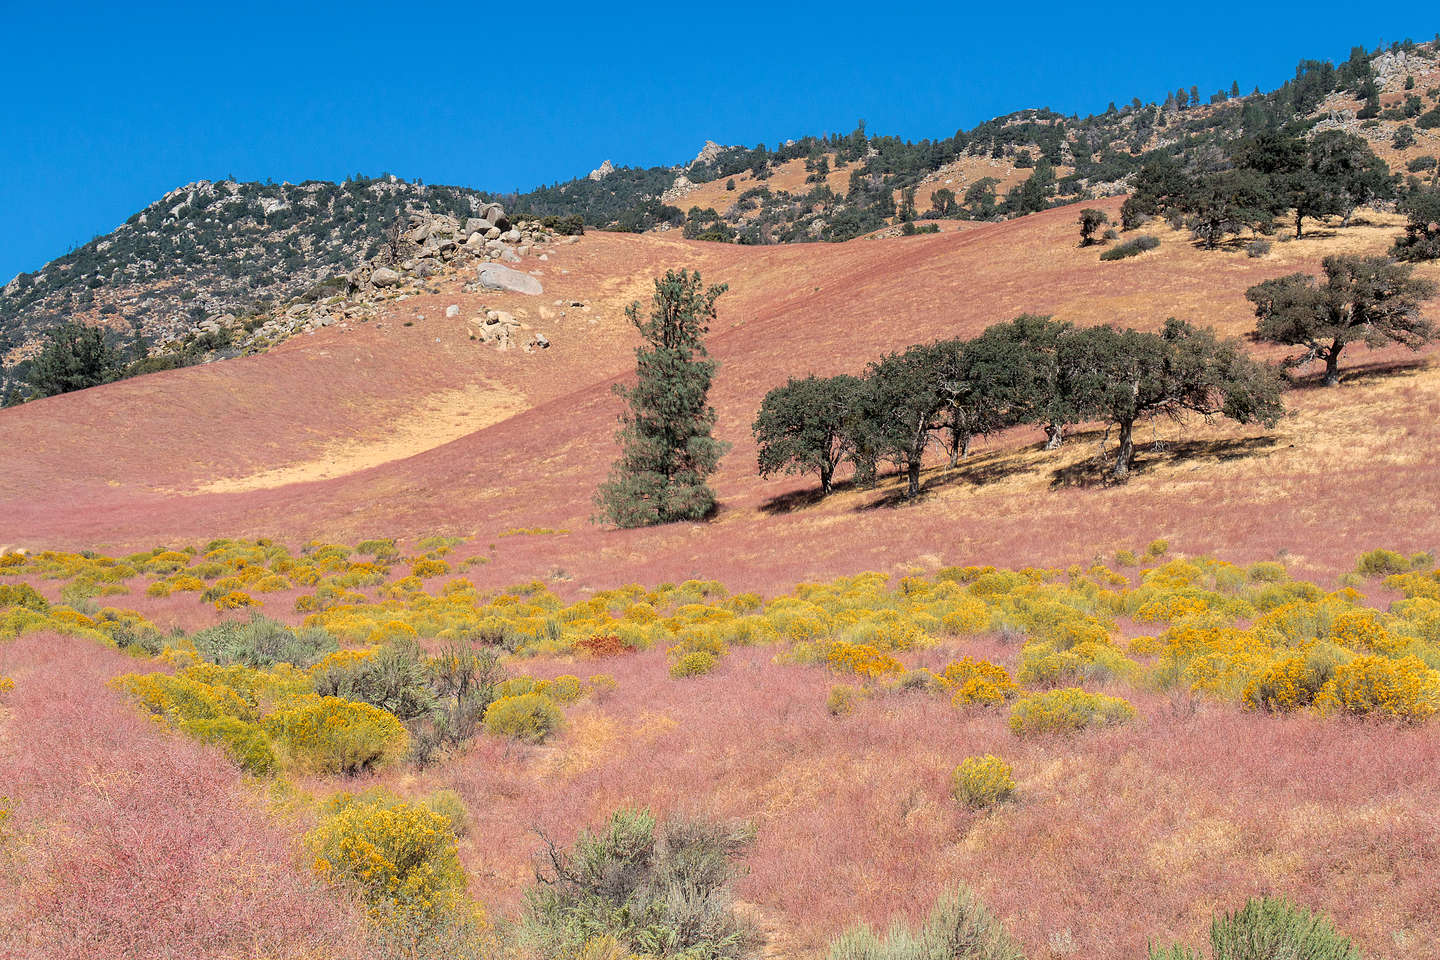 The lovely colors along Jawbone Canyon Road